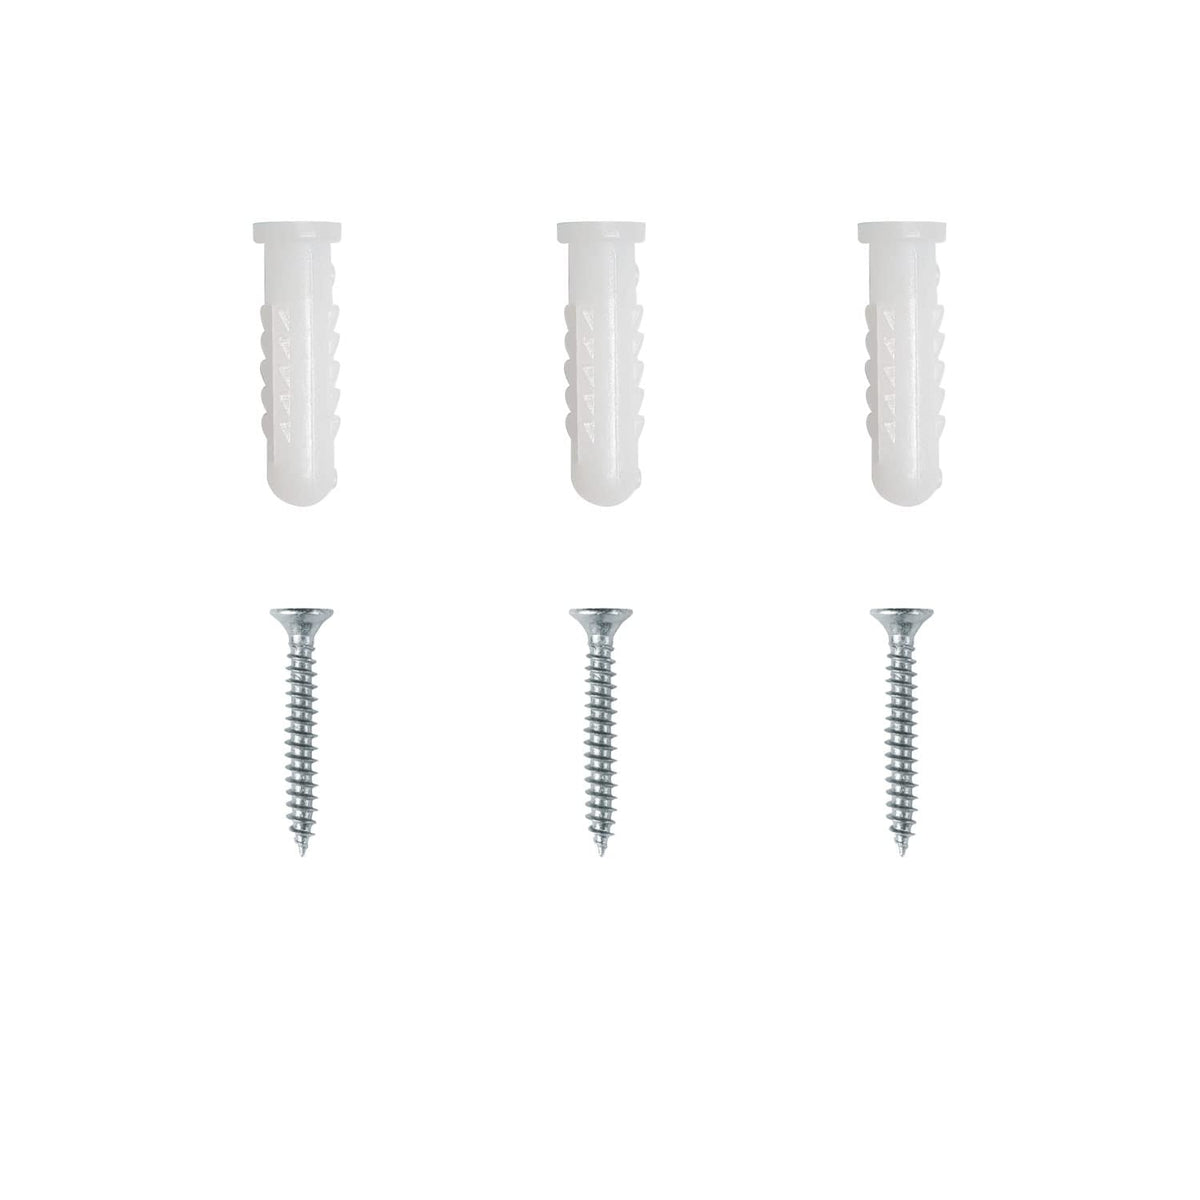 Dzees Drywall Anchor with Wall Screw (Set of 3)